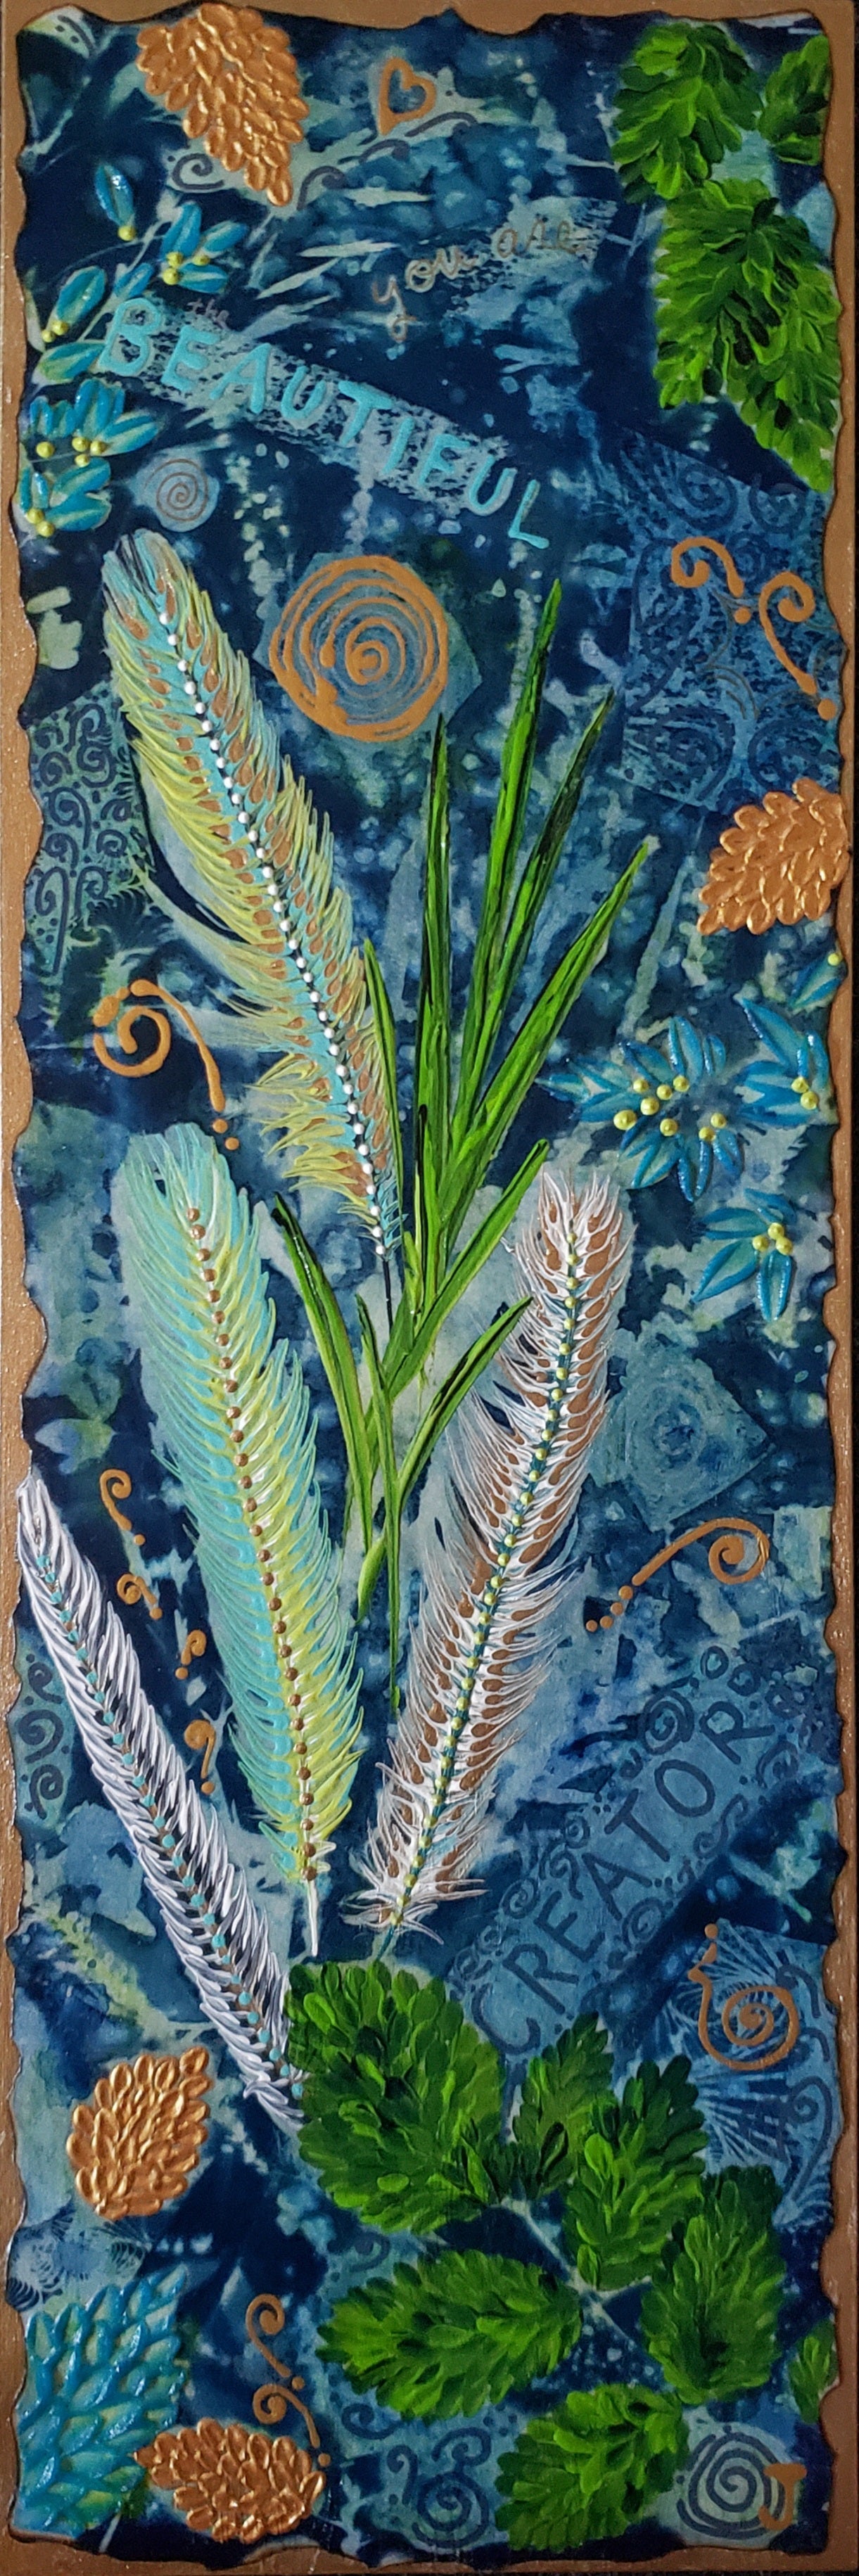 Cyanotype Sunprint of feathers n leaves in blues and greens with gold accents and a spiritual message enscribed